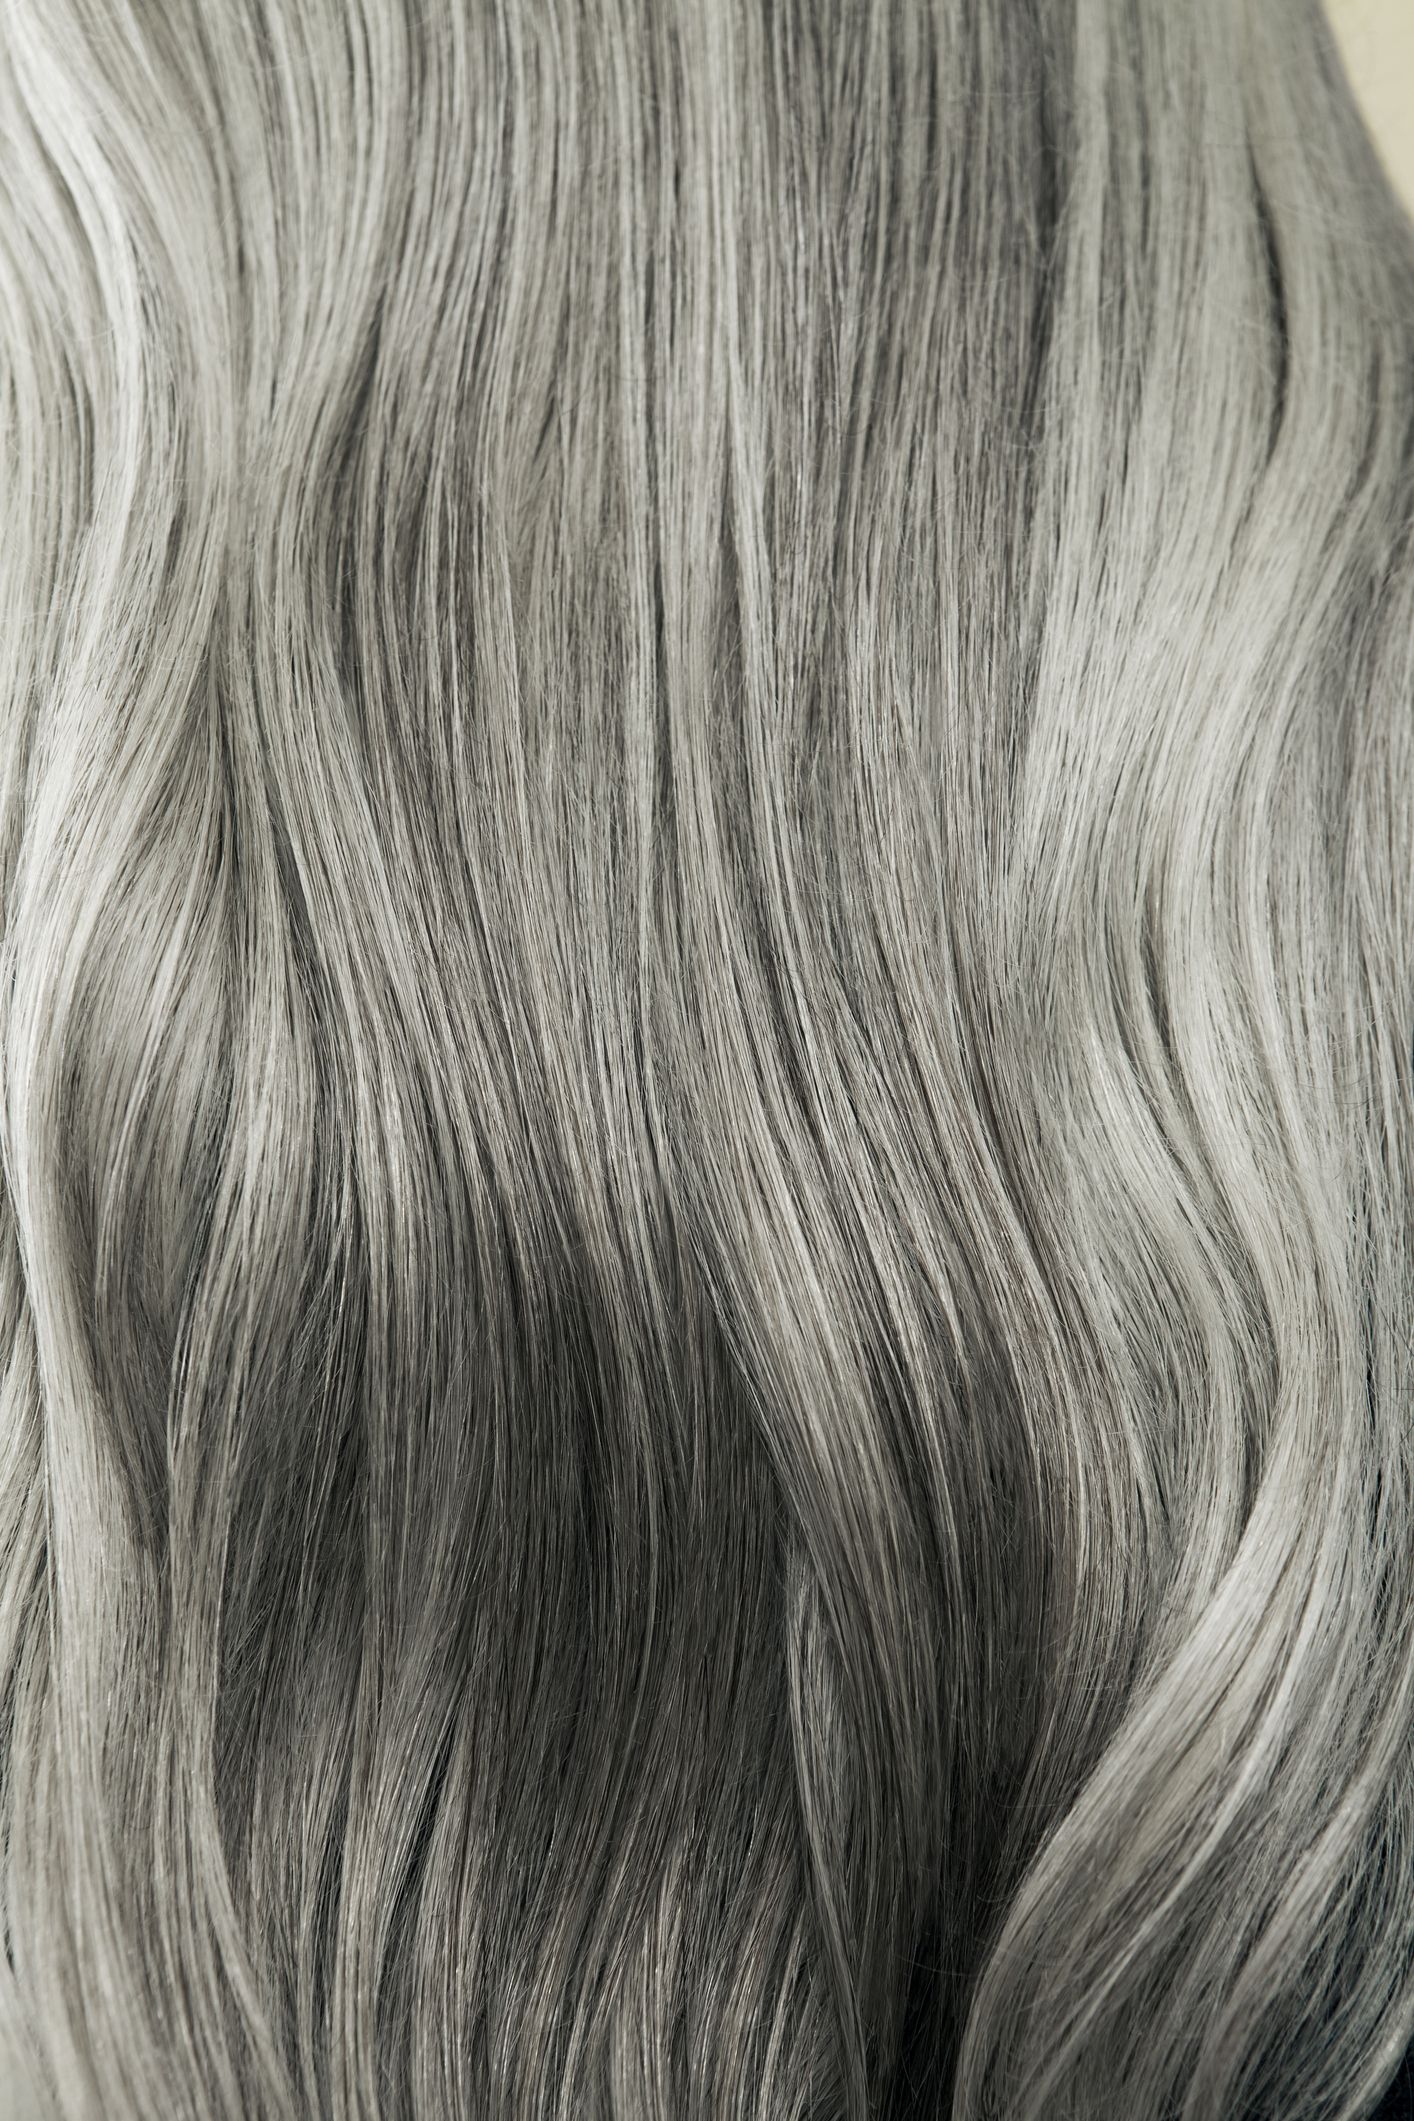 Is Quarantine Stress Causing Your Hair to Turn Gray? - Gray Hair Guide,  Causes, Transition